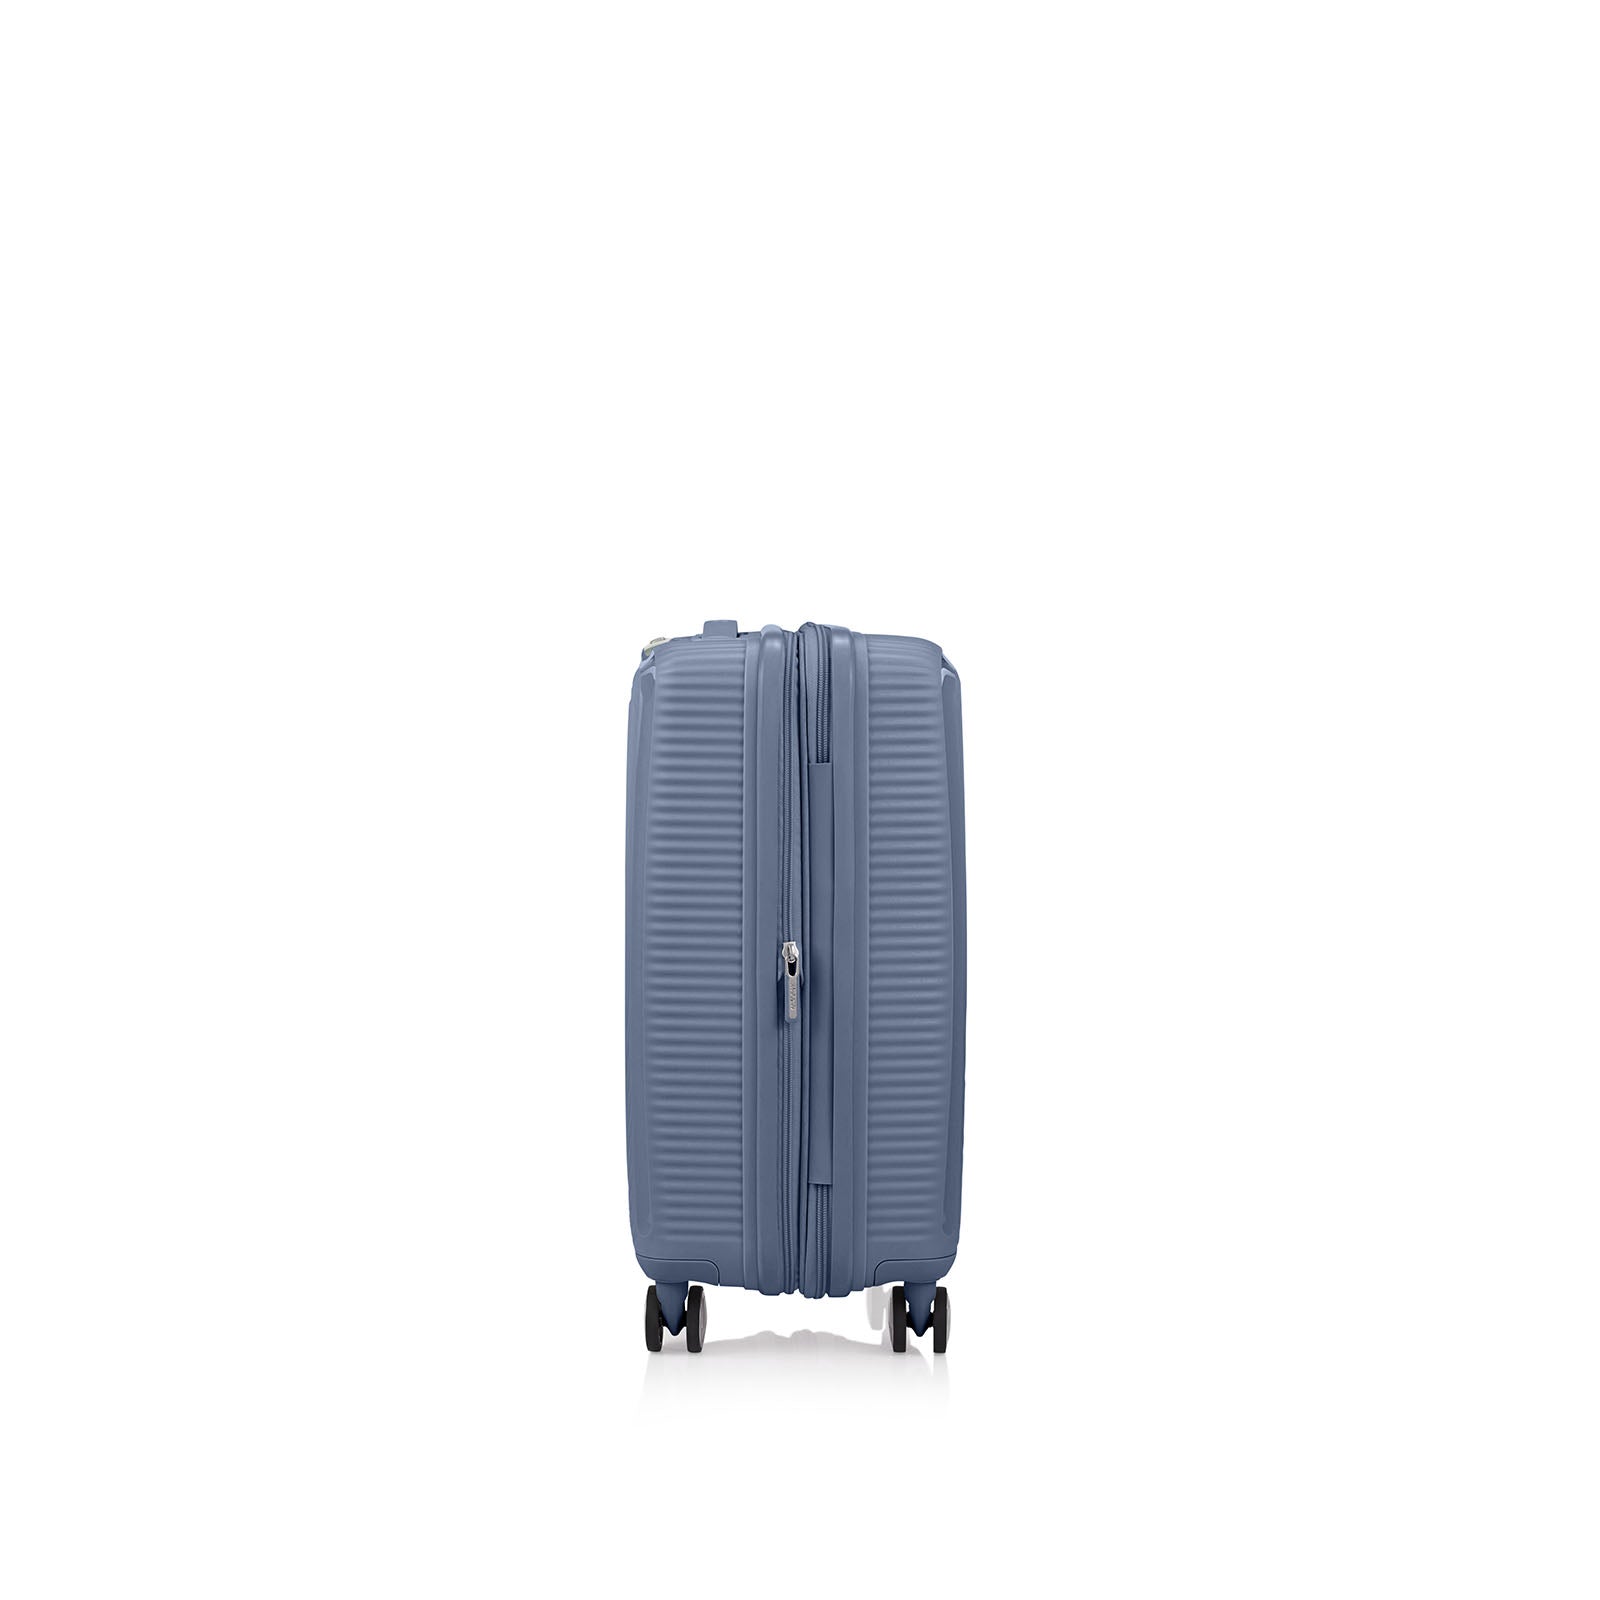 American-Tourister-Curio-2-55cm-Carry-On-Suitcase-Stone-Blue-Hinge